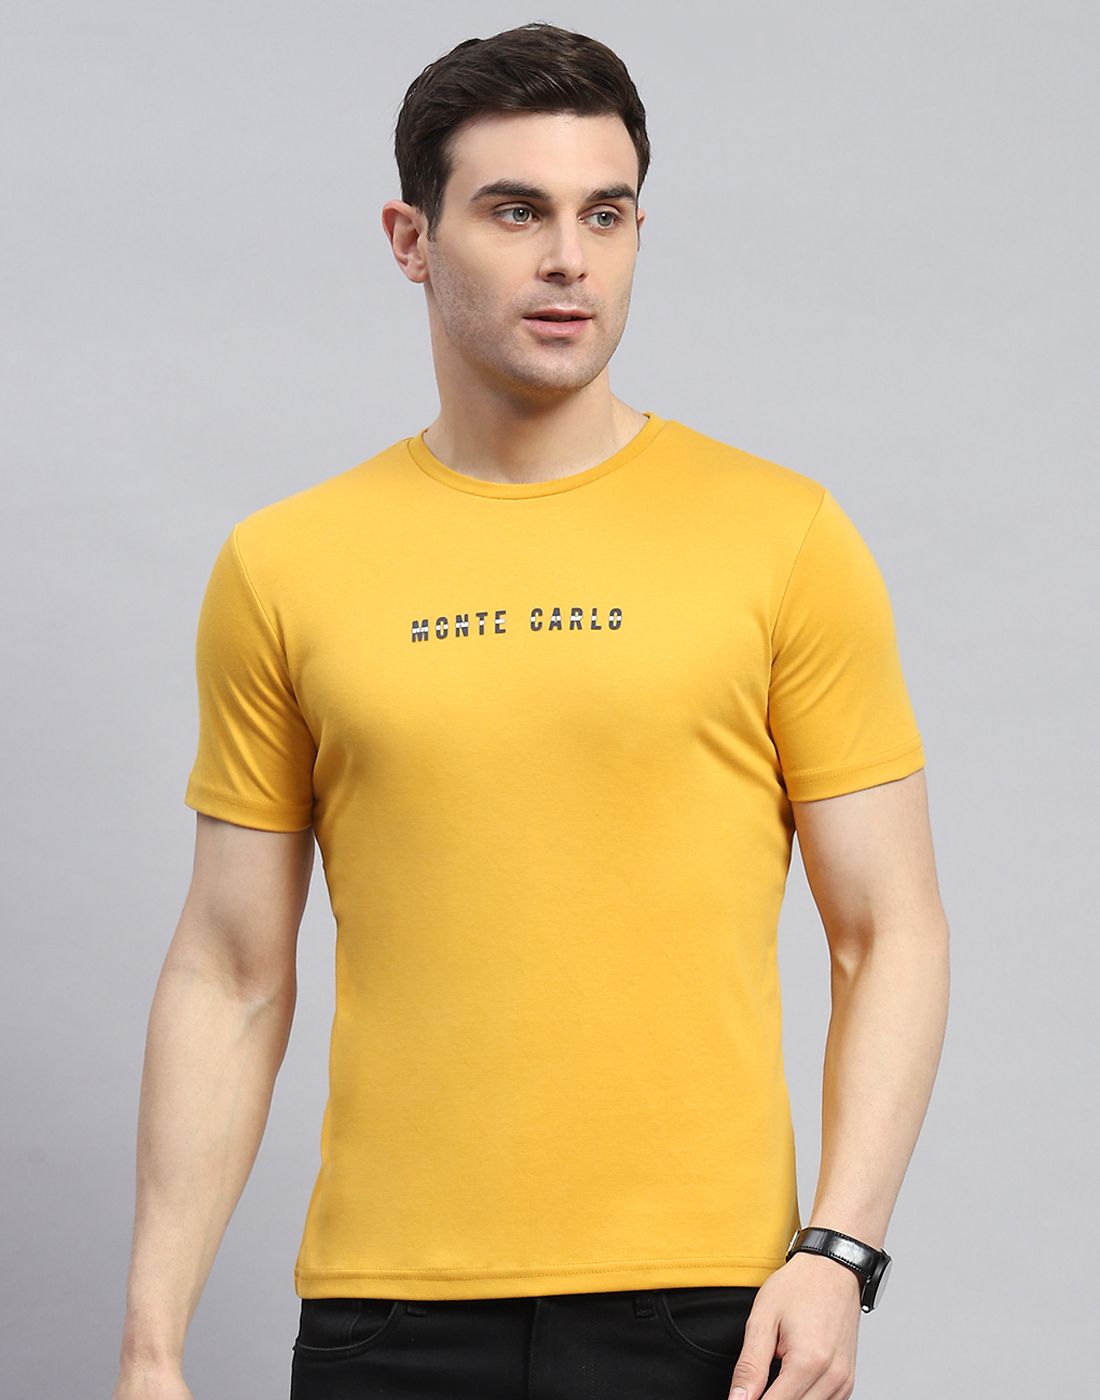     			Monte Carlo Cotton Blend Regular Fit Printed Half Sleeves Men's T-Shirt - Yellow ( Pack of 1 )